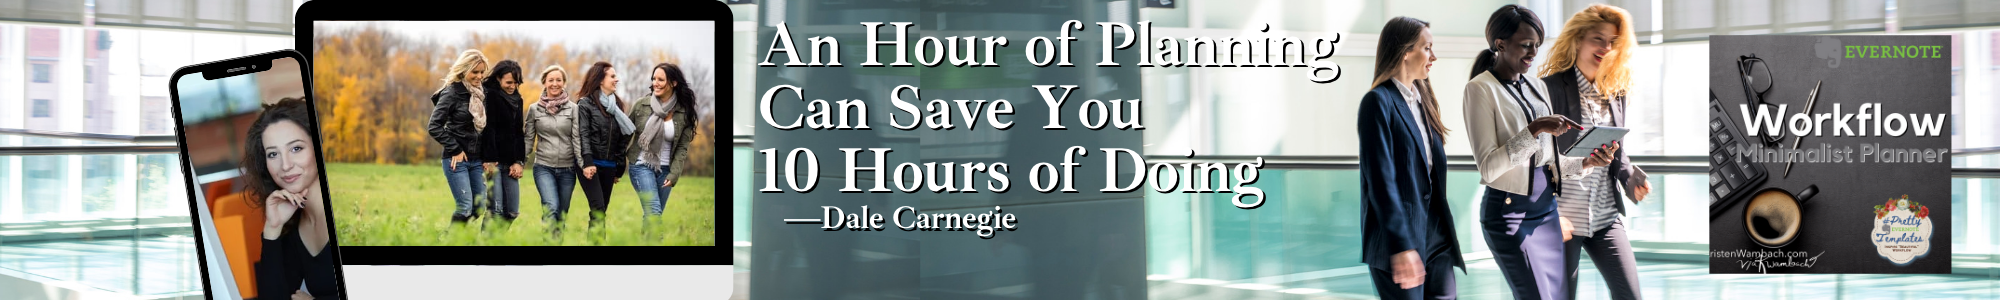 Evernote Workflow An hour of Planning can save you 10 hours of doing Dale Carnegie 